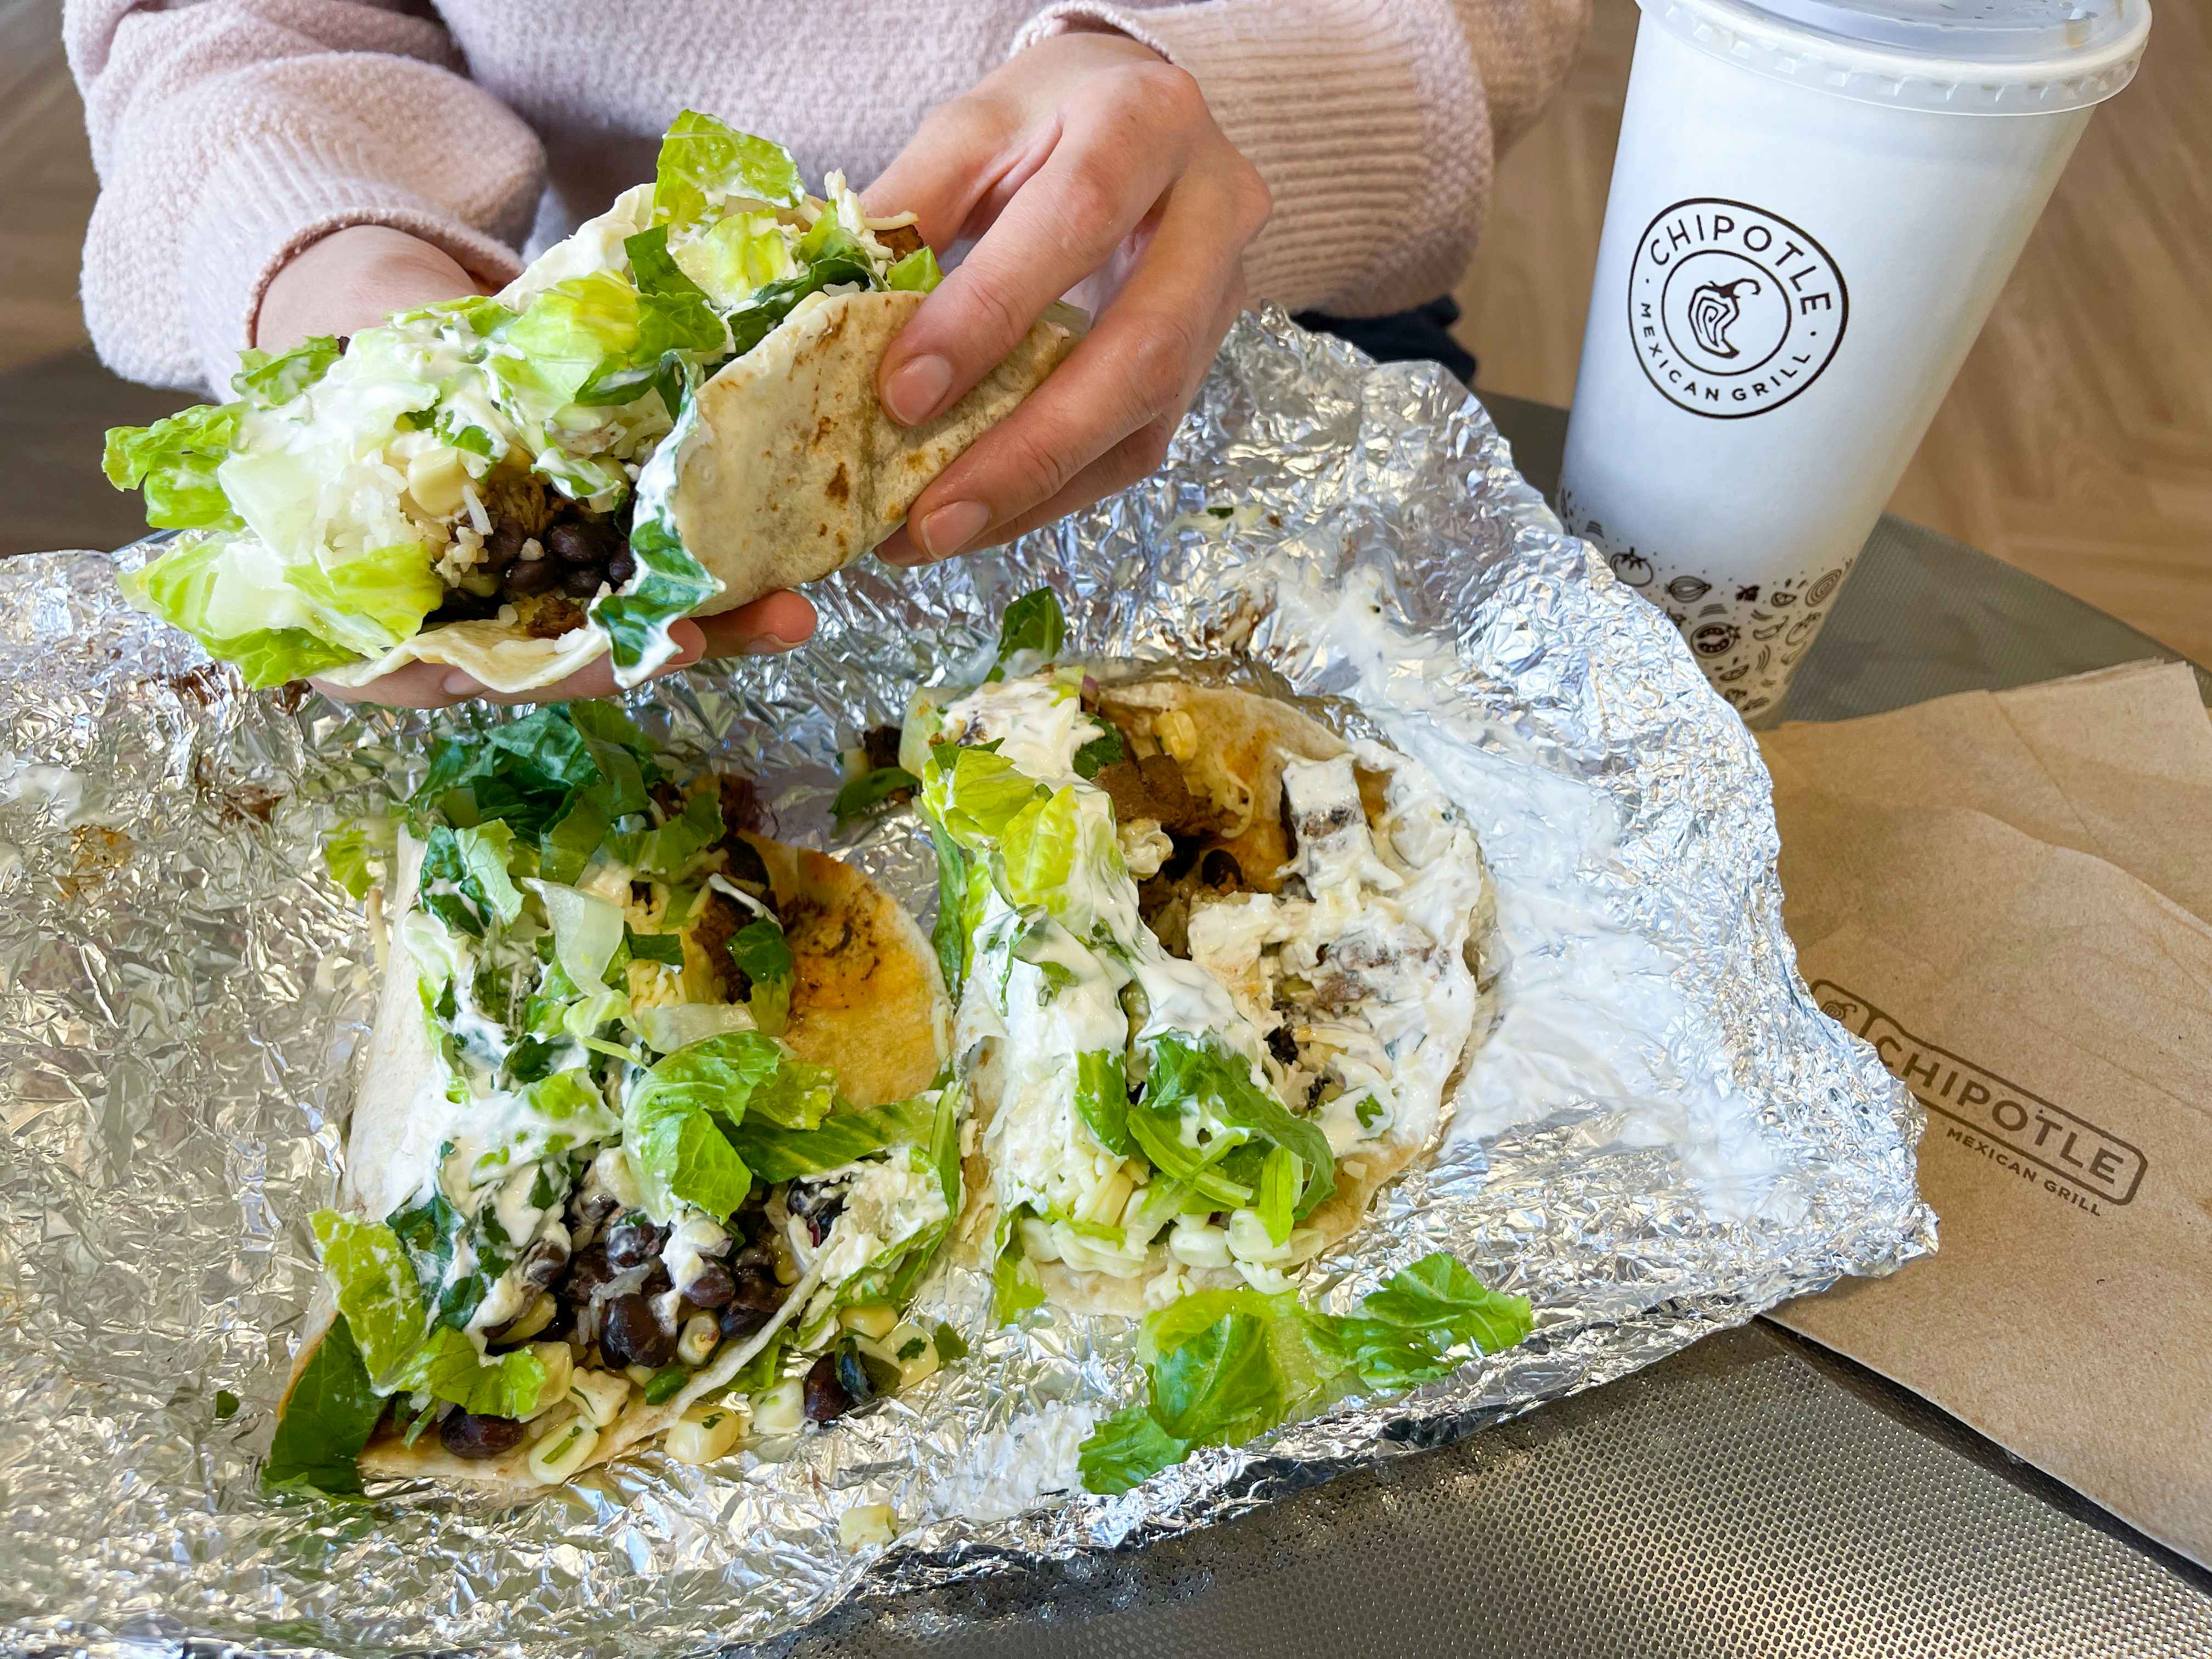 Here's a Chipotle Ordering Hack to Double Your Burrito's Size